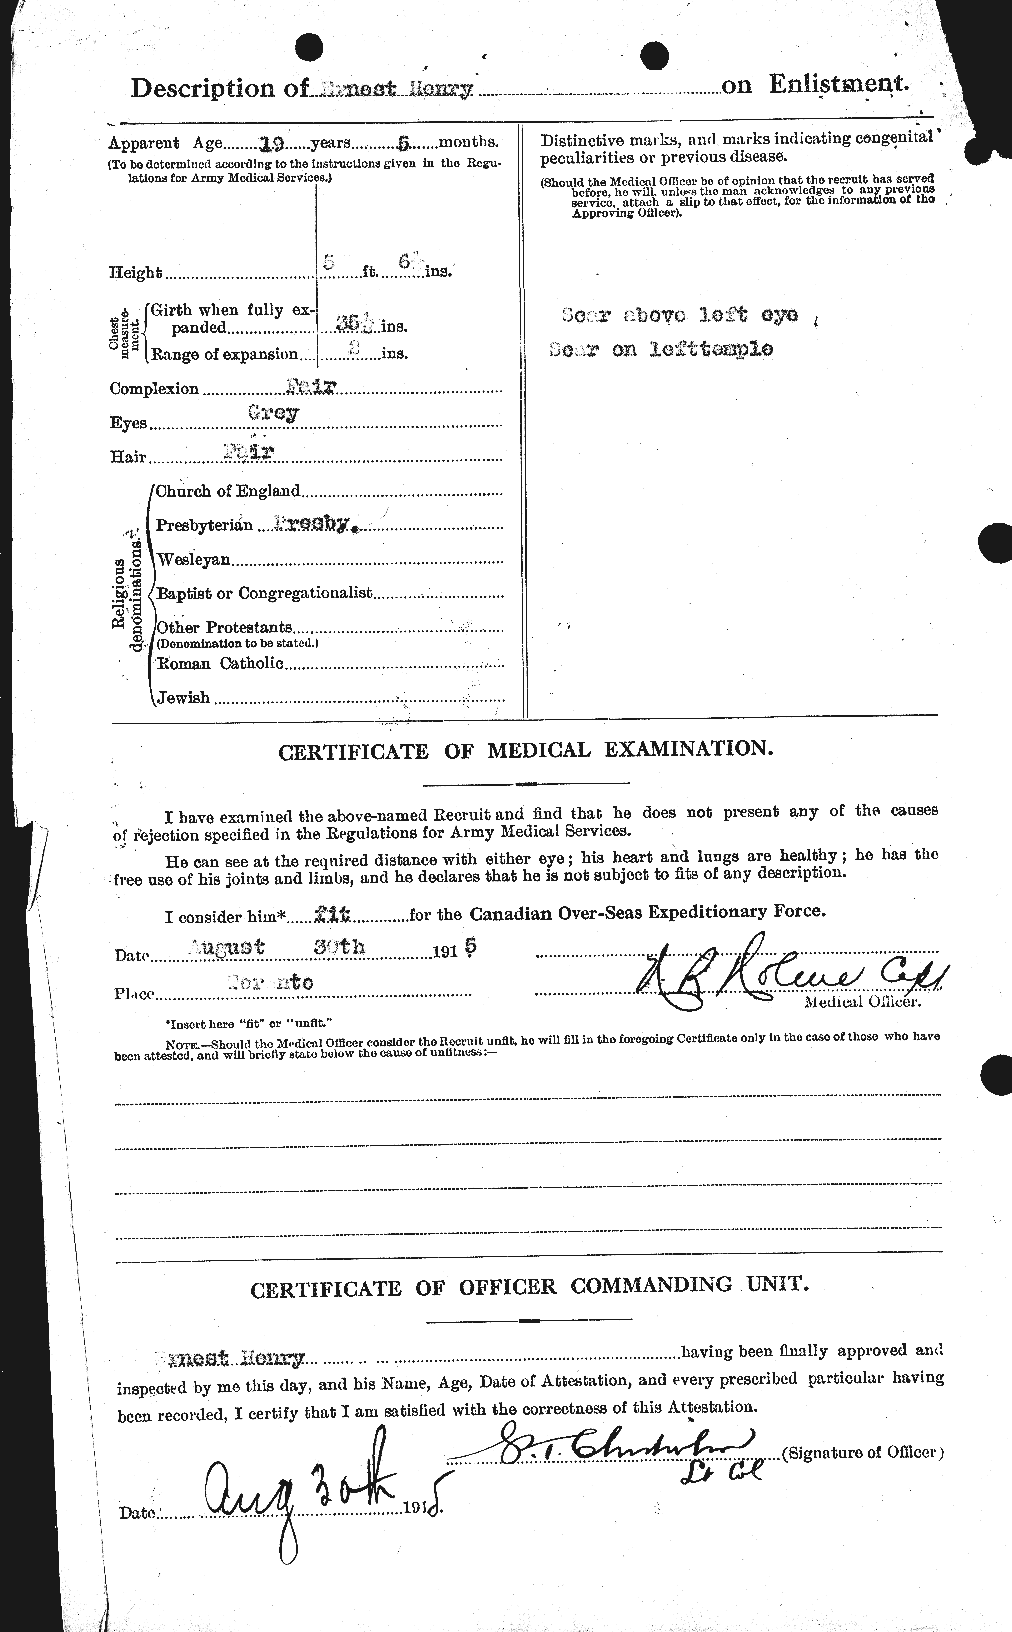 Personnel Records of the First World War - CEF 392848b